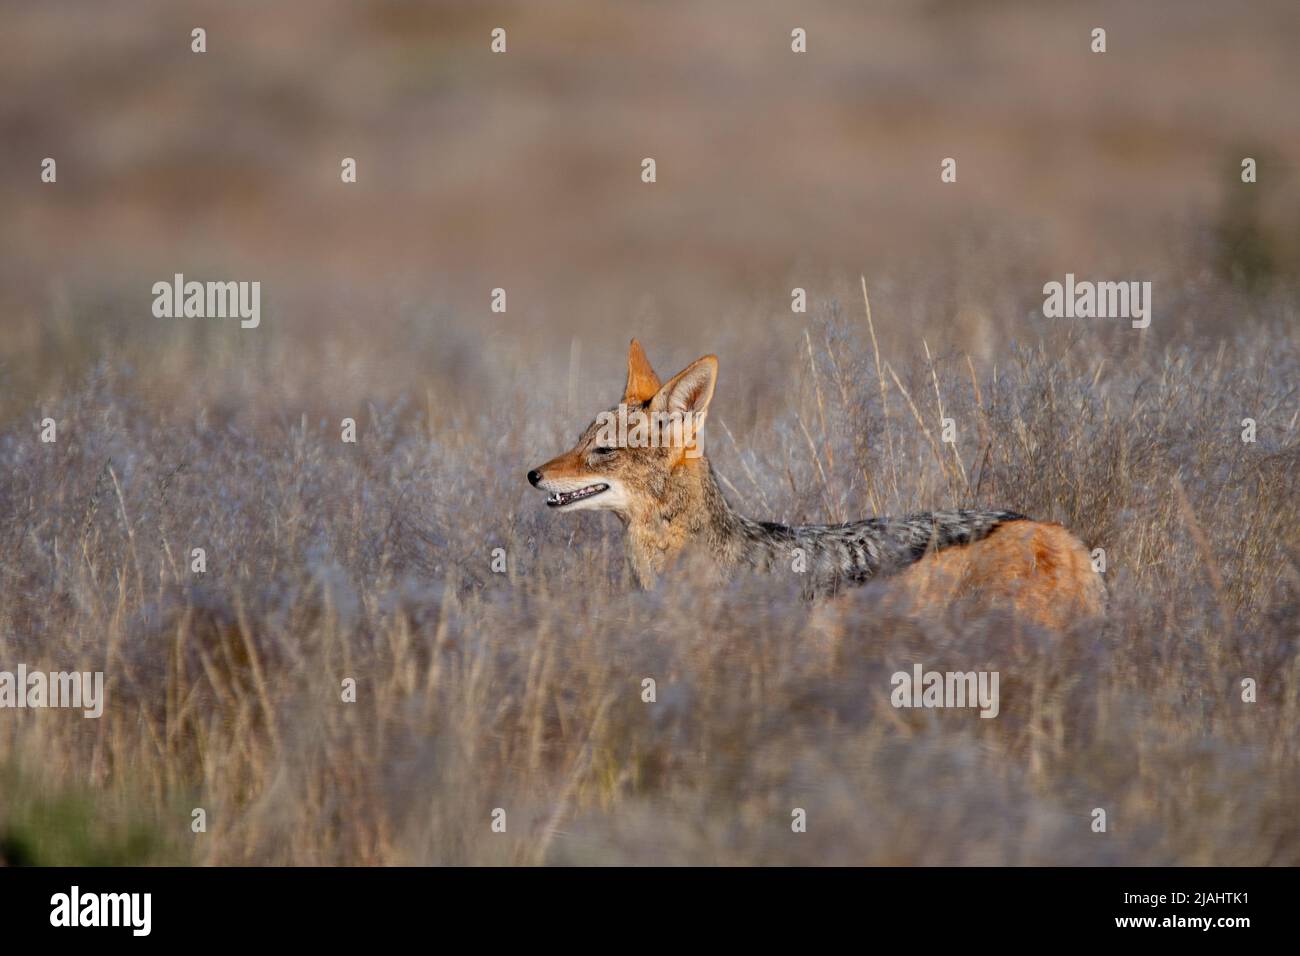 Black-backed jackal in the grass in Namibia Stock Photo